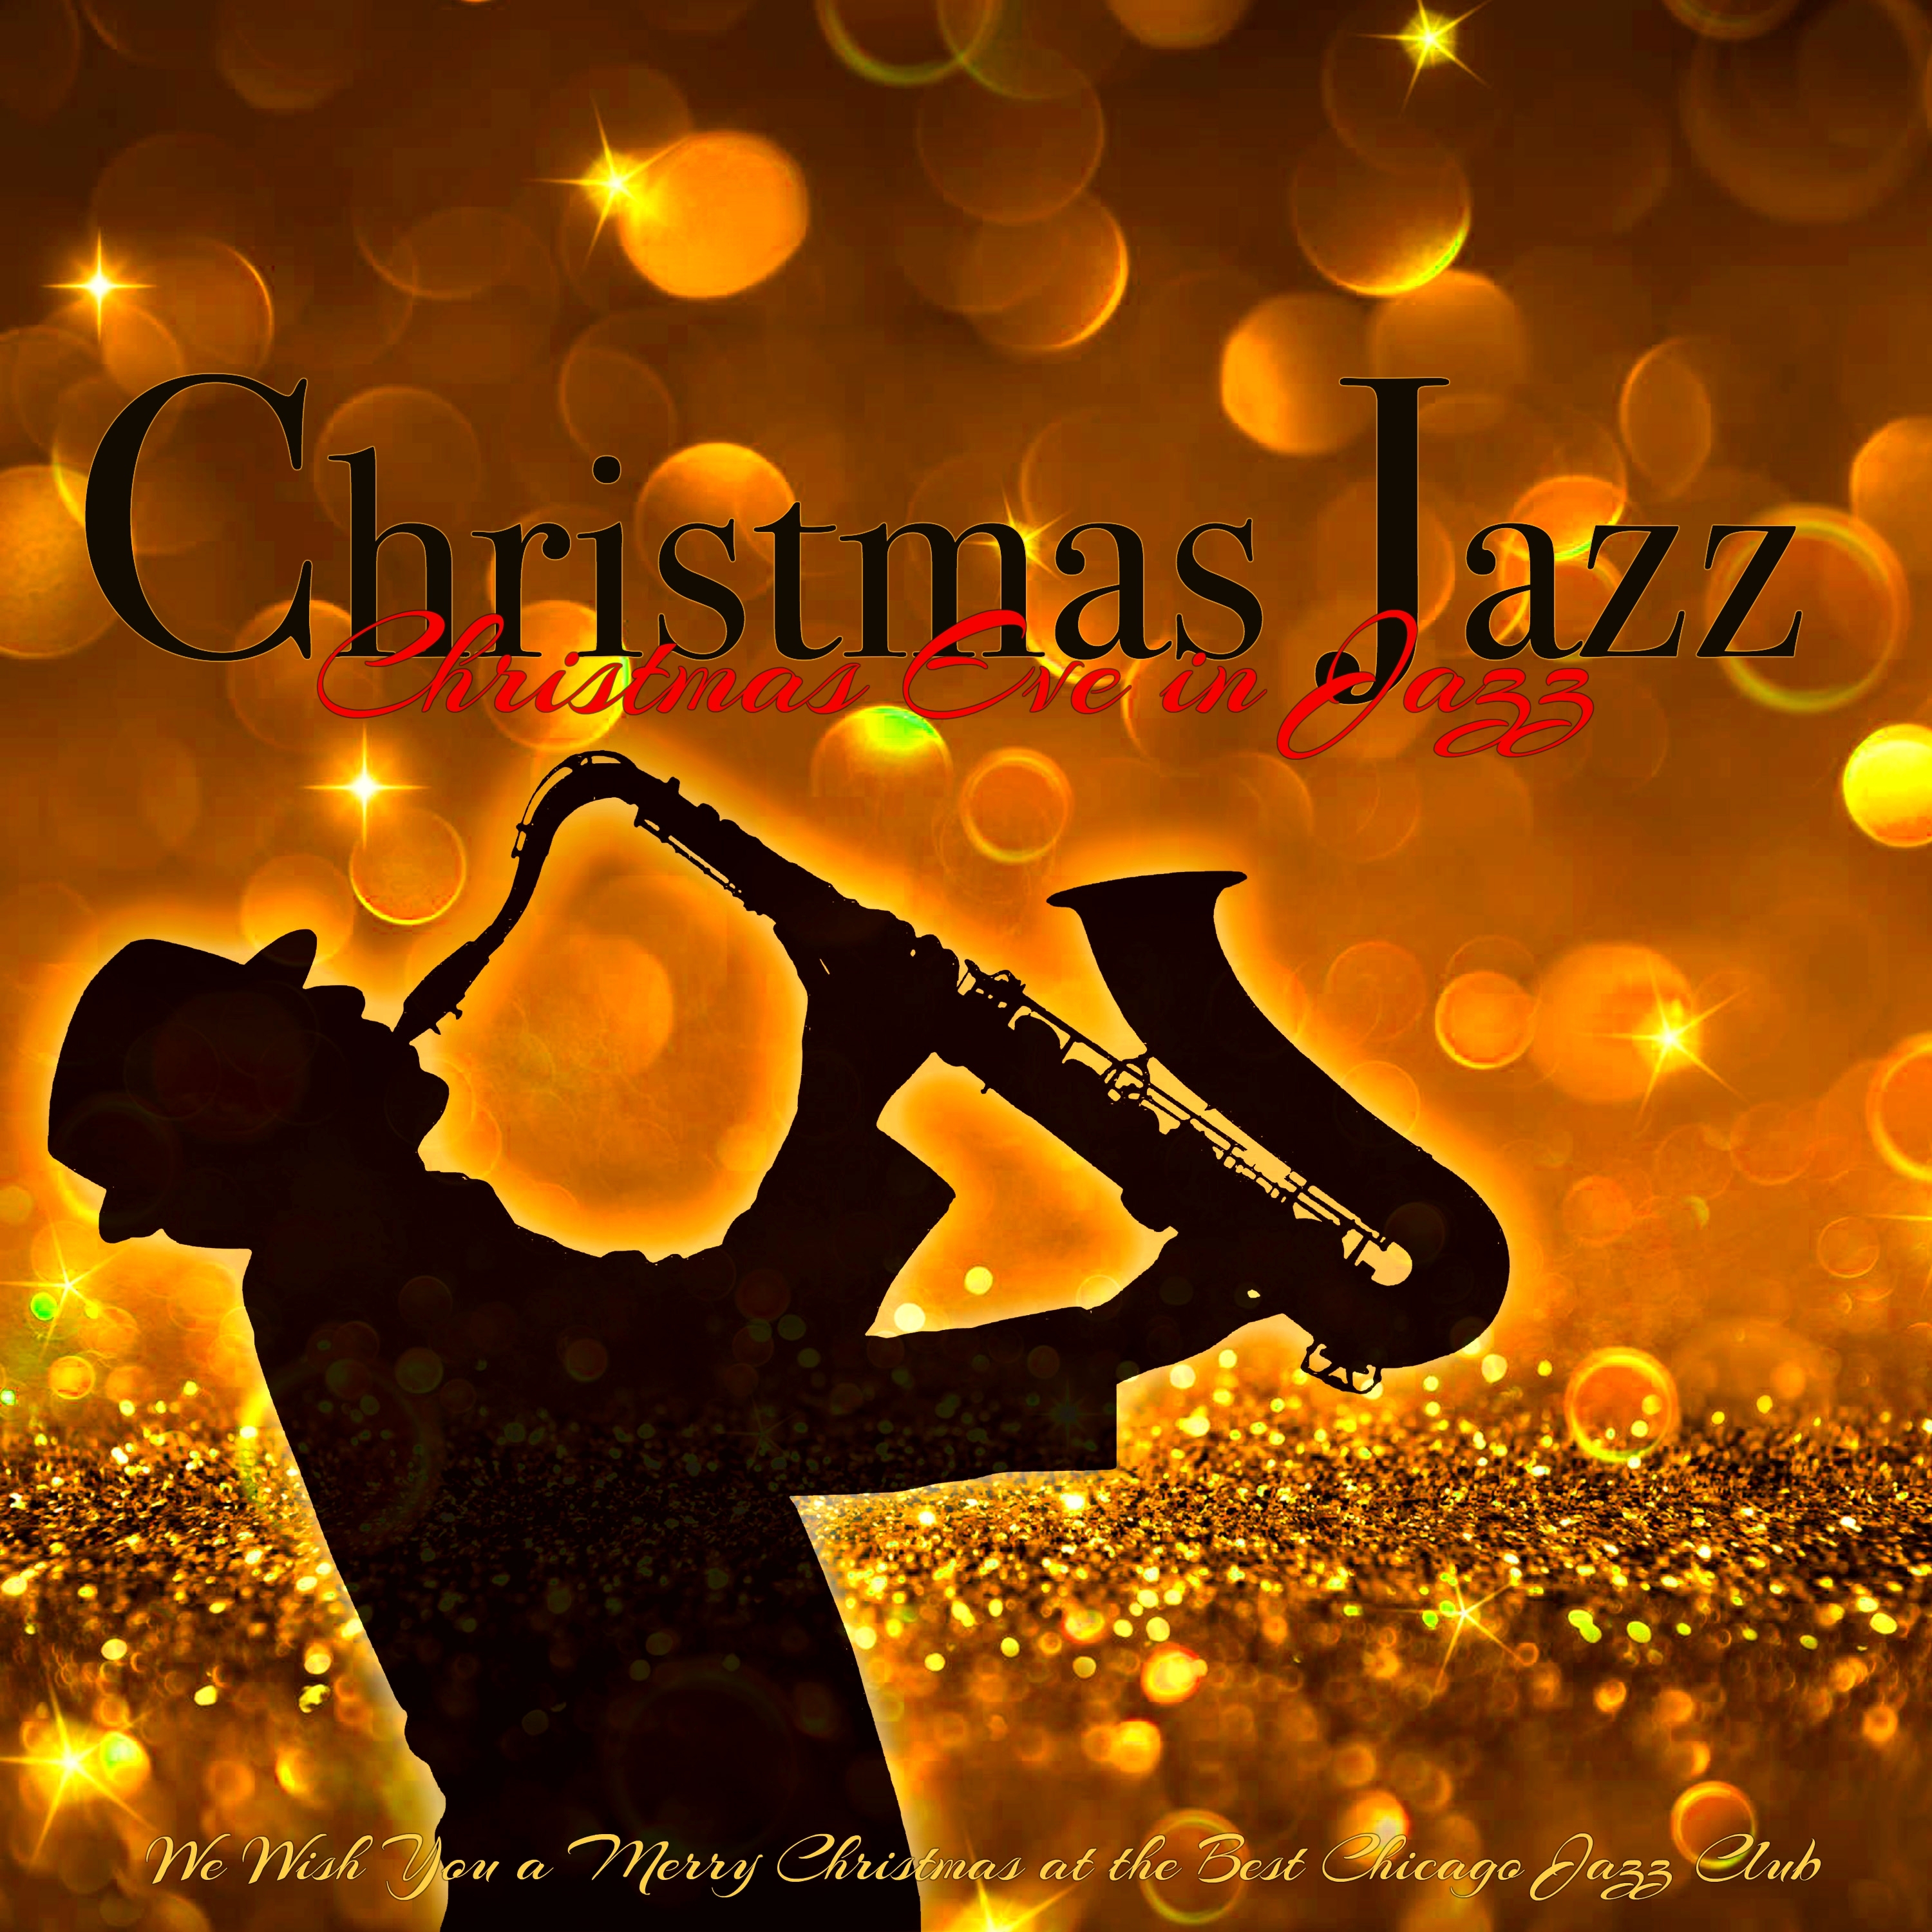 Christmas Jazz - Christmas Eve in Jazz, We Wish You a Merry Christmas at the Best Chicago Jazz Club